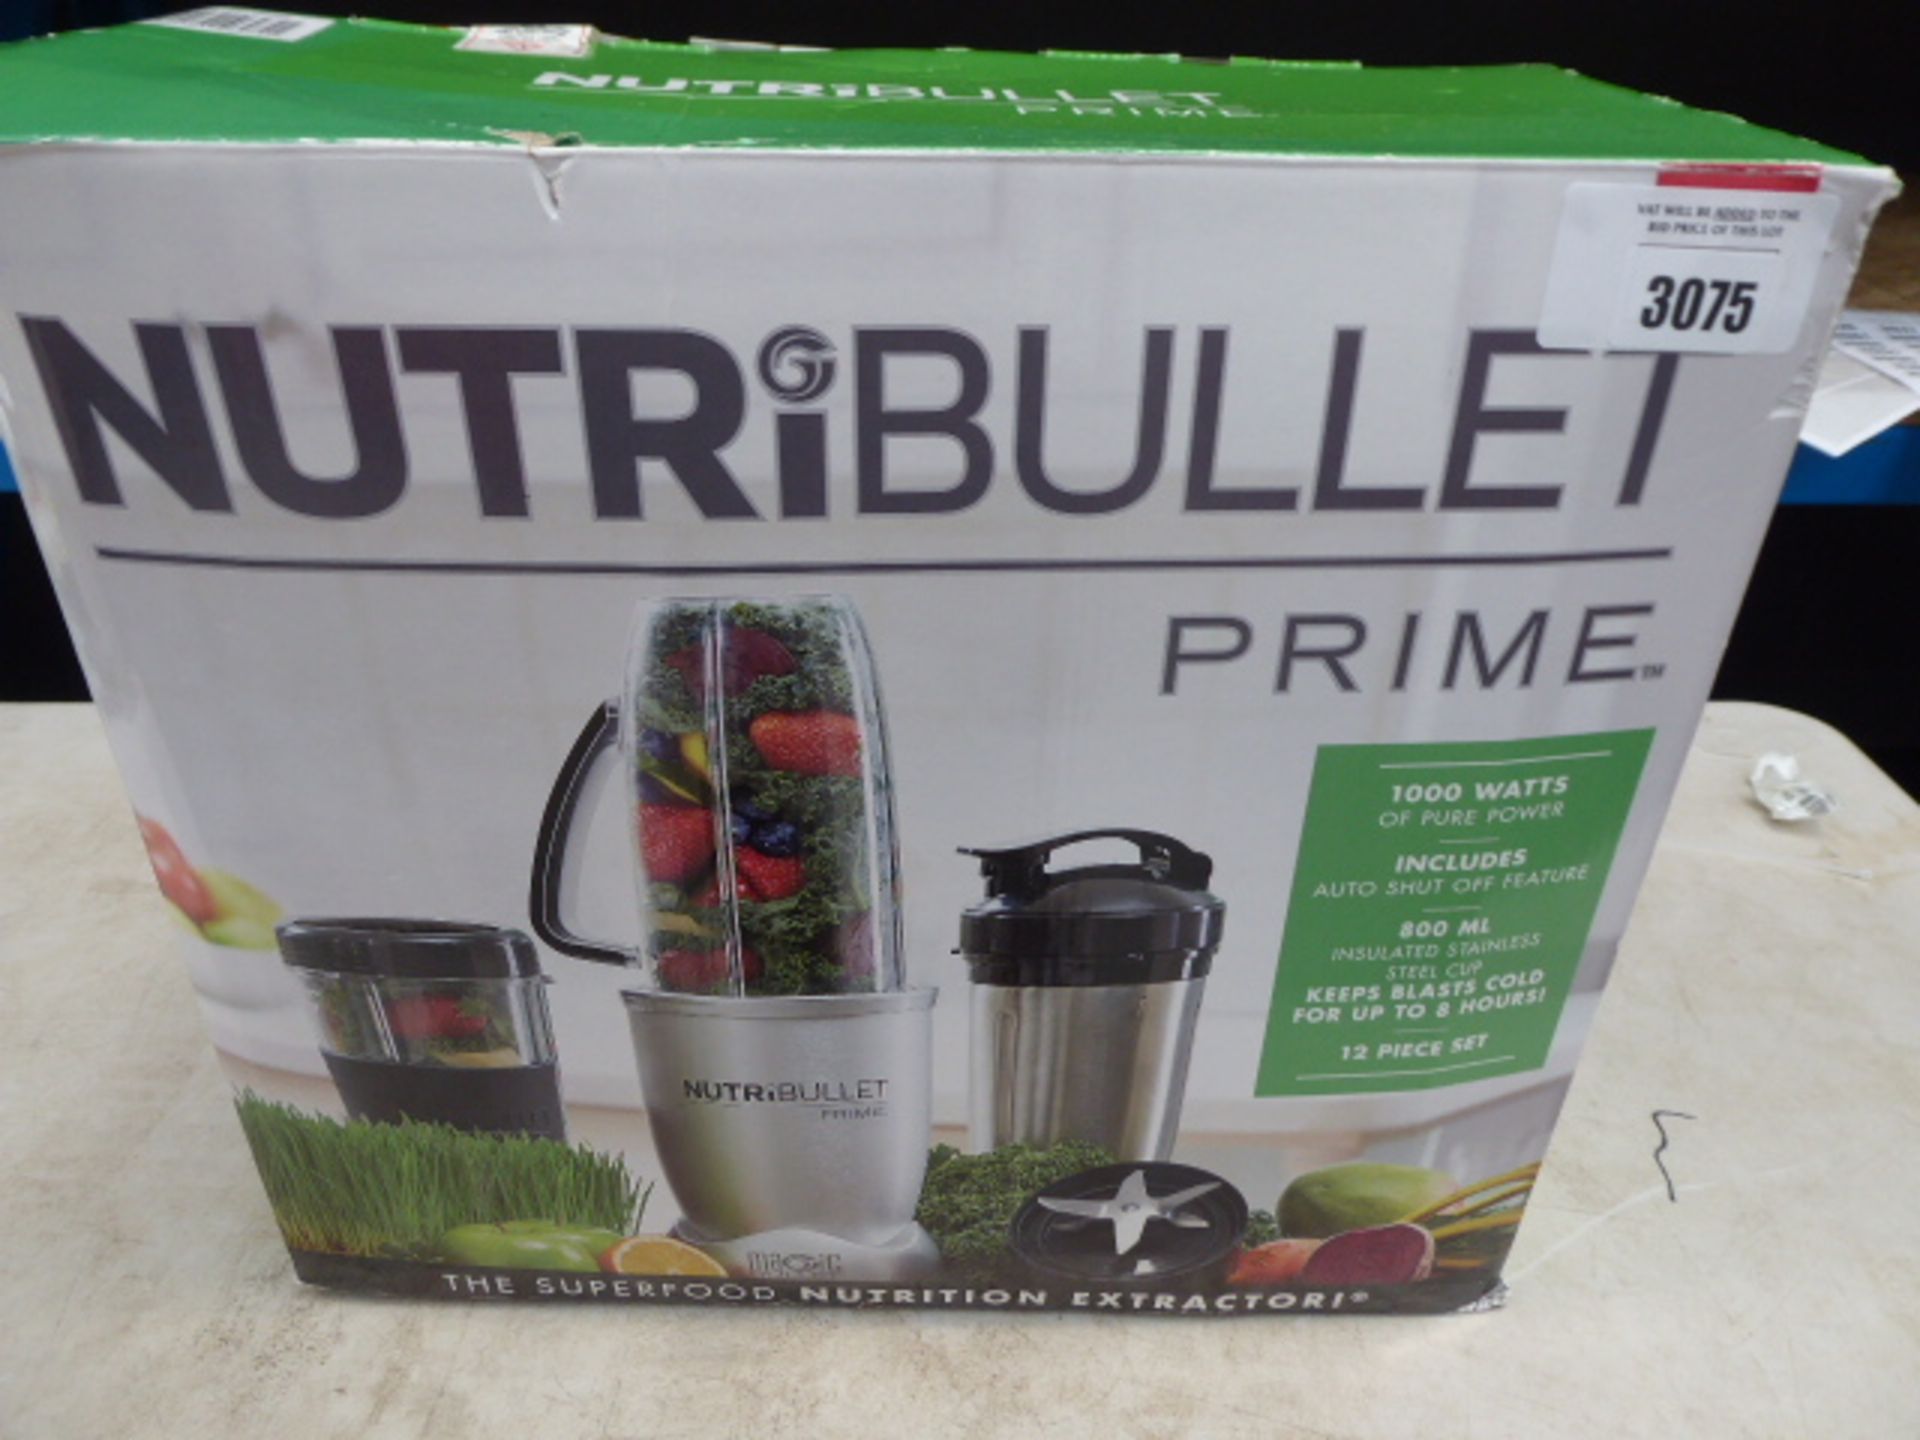 Boxed Nutri Bullet with attachment